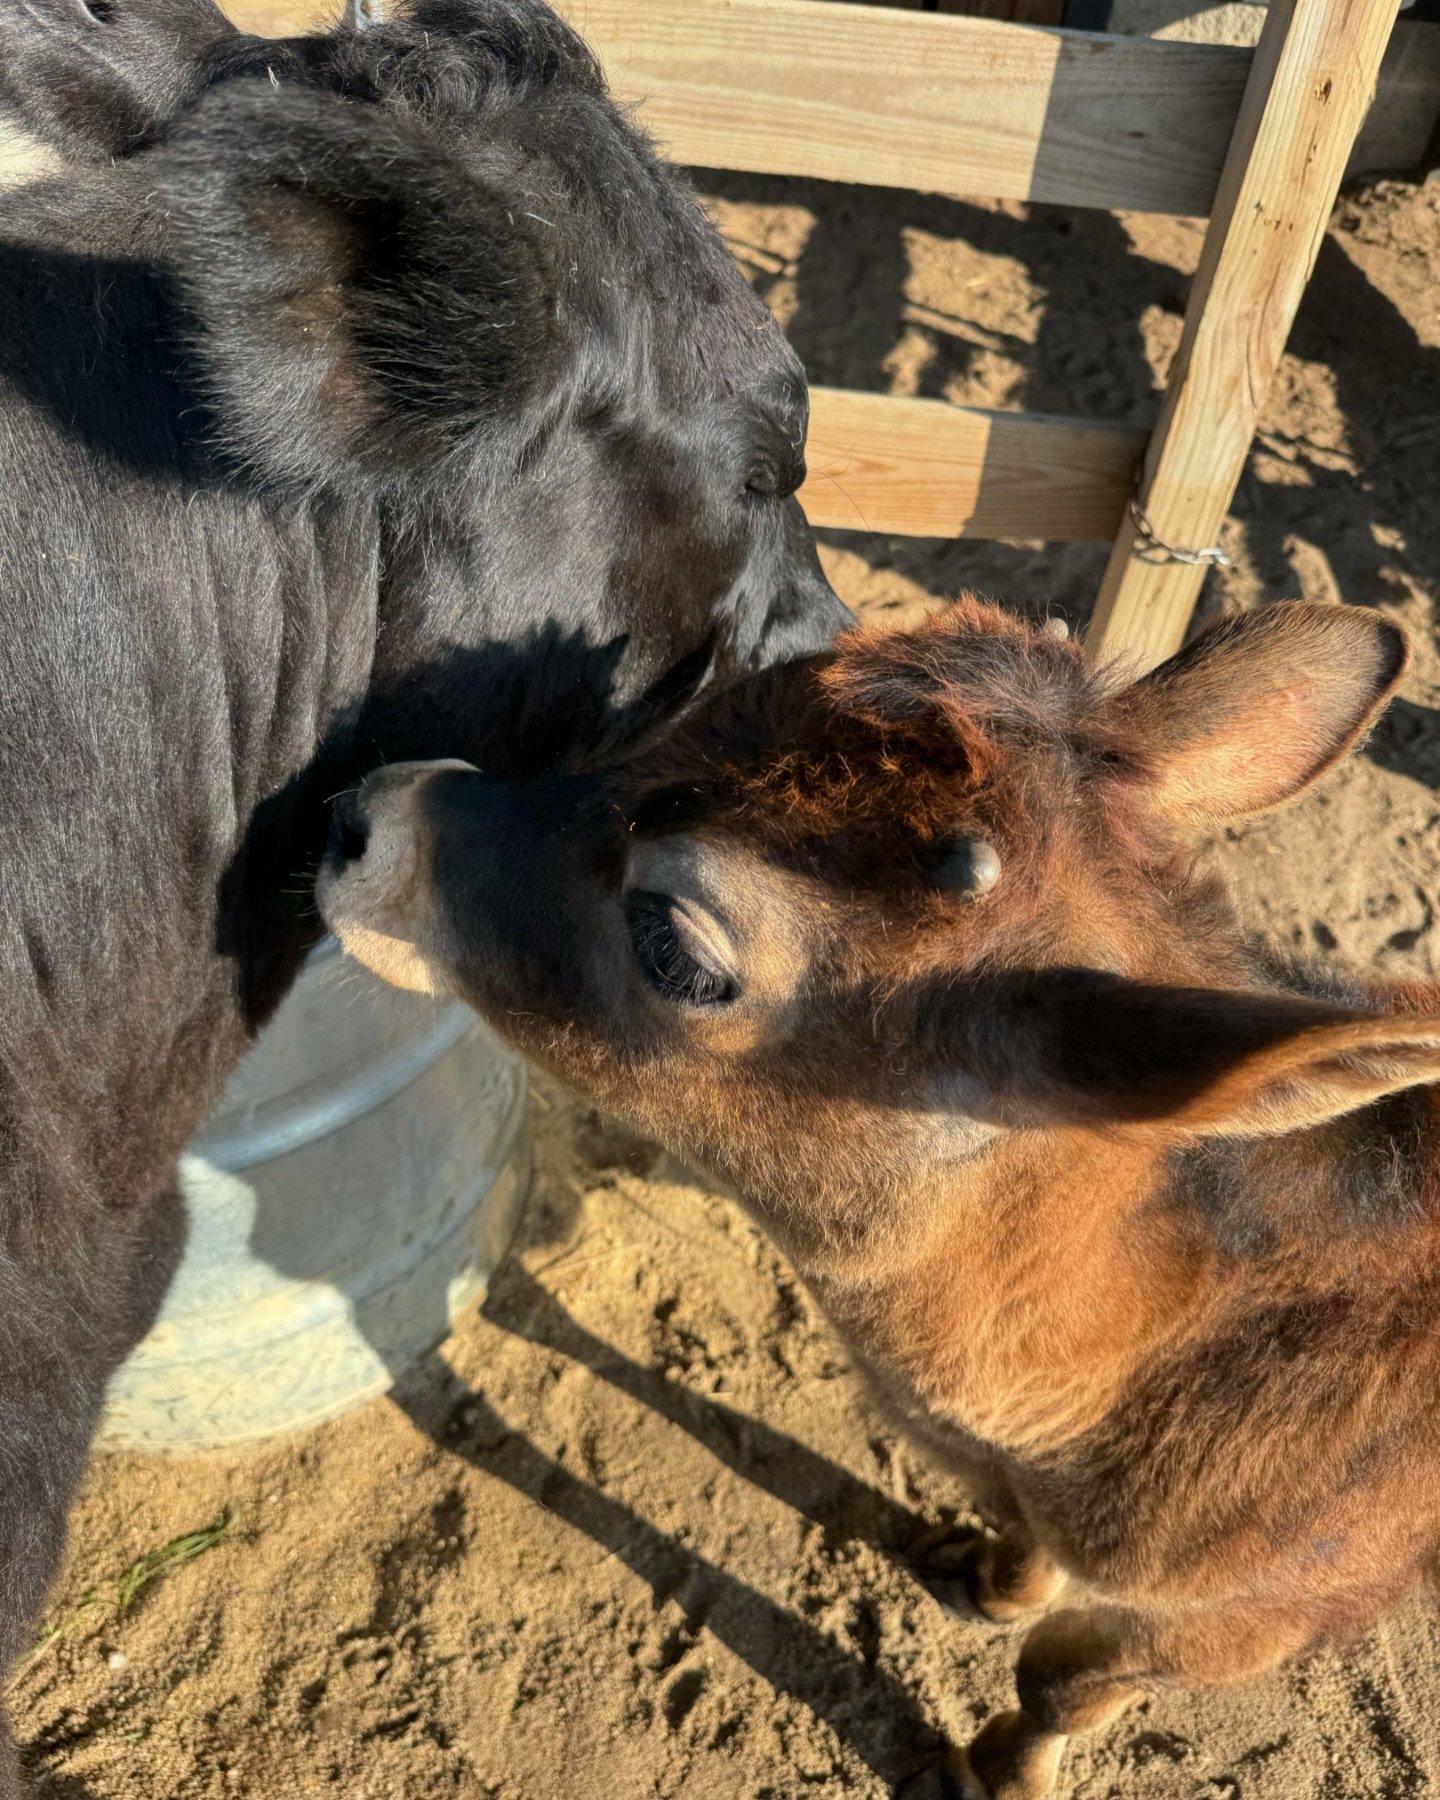 Lizzie and Ozzie (how did we name both cows with double Z&rsquo;s??) 
The water troughs are the local meeting place after breakfast and everyone is usually half asleep after the night of coyotes on the farm and a morning of eagles in the field. The e